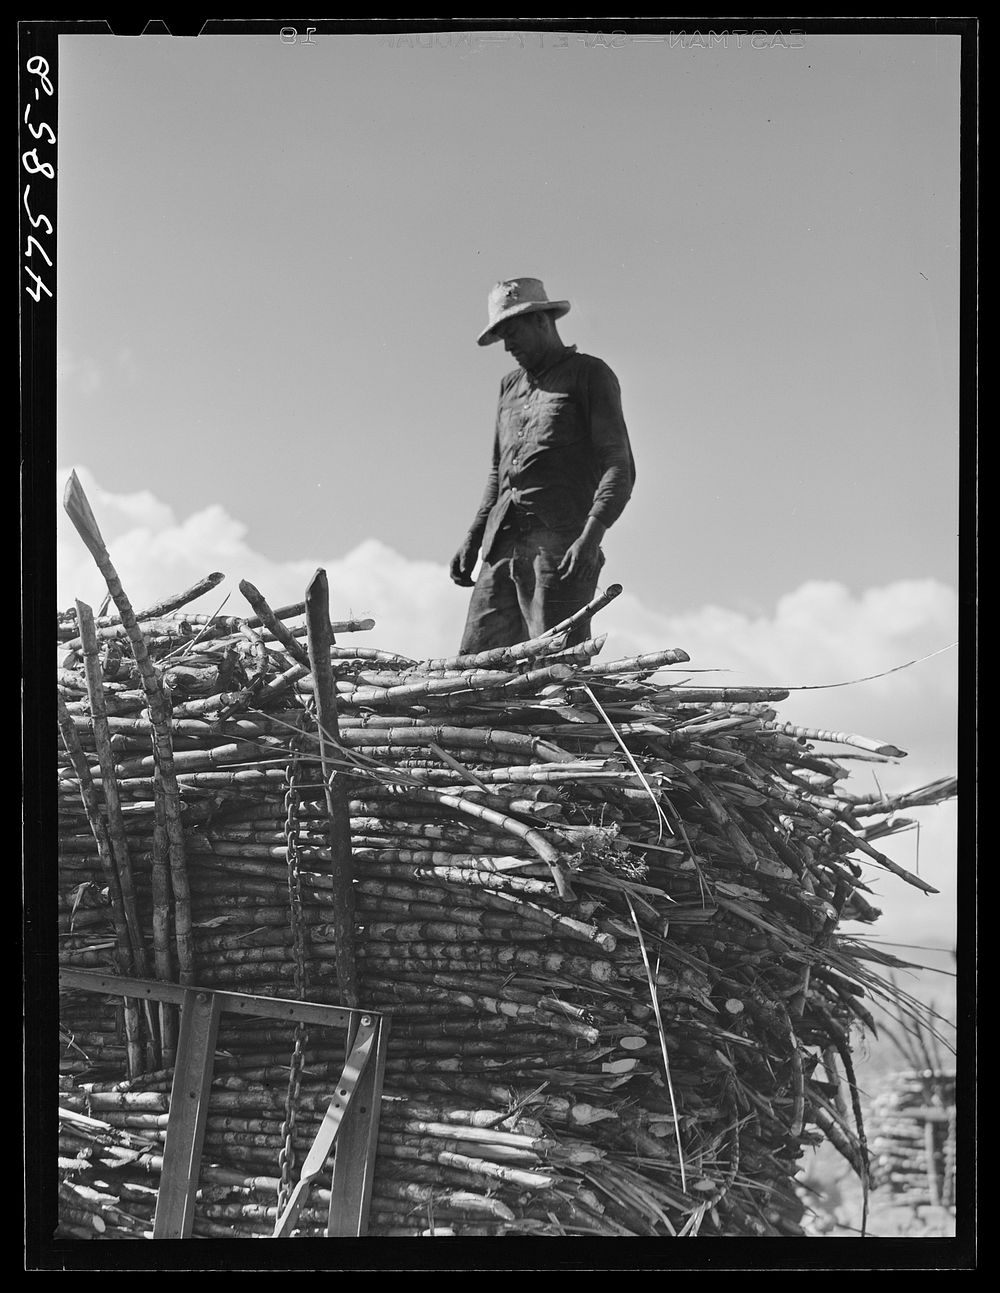 [Untitled photo, possibly related to: Guanica, Puerto Rico (vicinity). Two or more teams of oxen are used to haul the sugar…